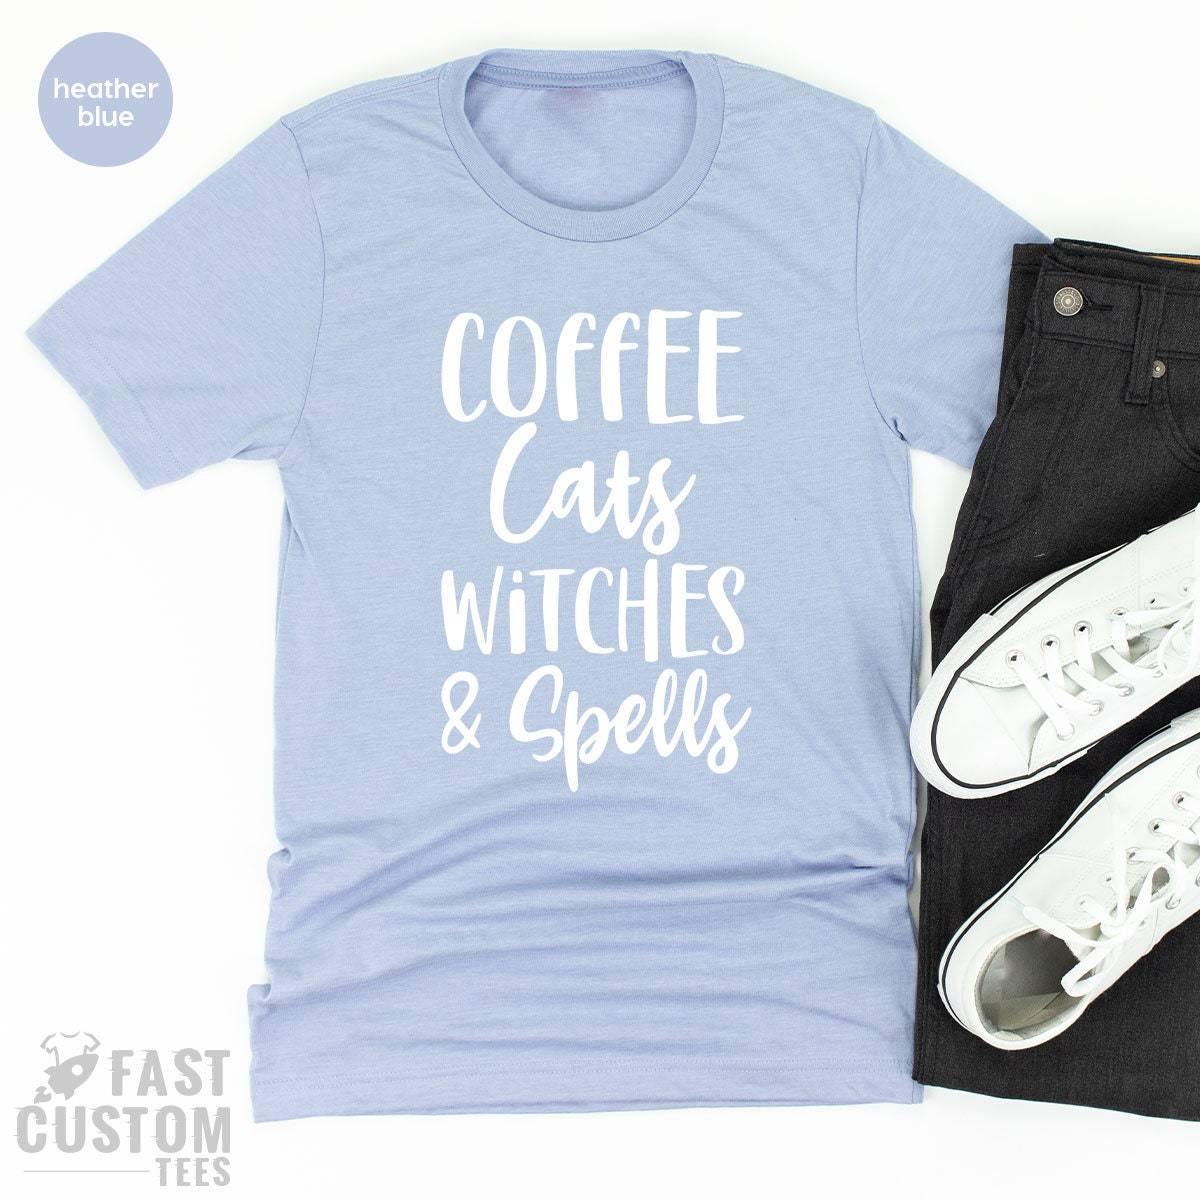 Coffee Cats Witches and Spells Shirt, Halloween Shirt, Witch Shirt, Coffee Lover Shirt, Funny Halloween Shirt, Halloween Gift - Fastdeliverytees.com